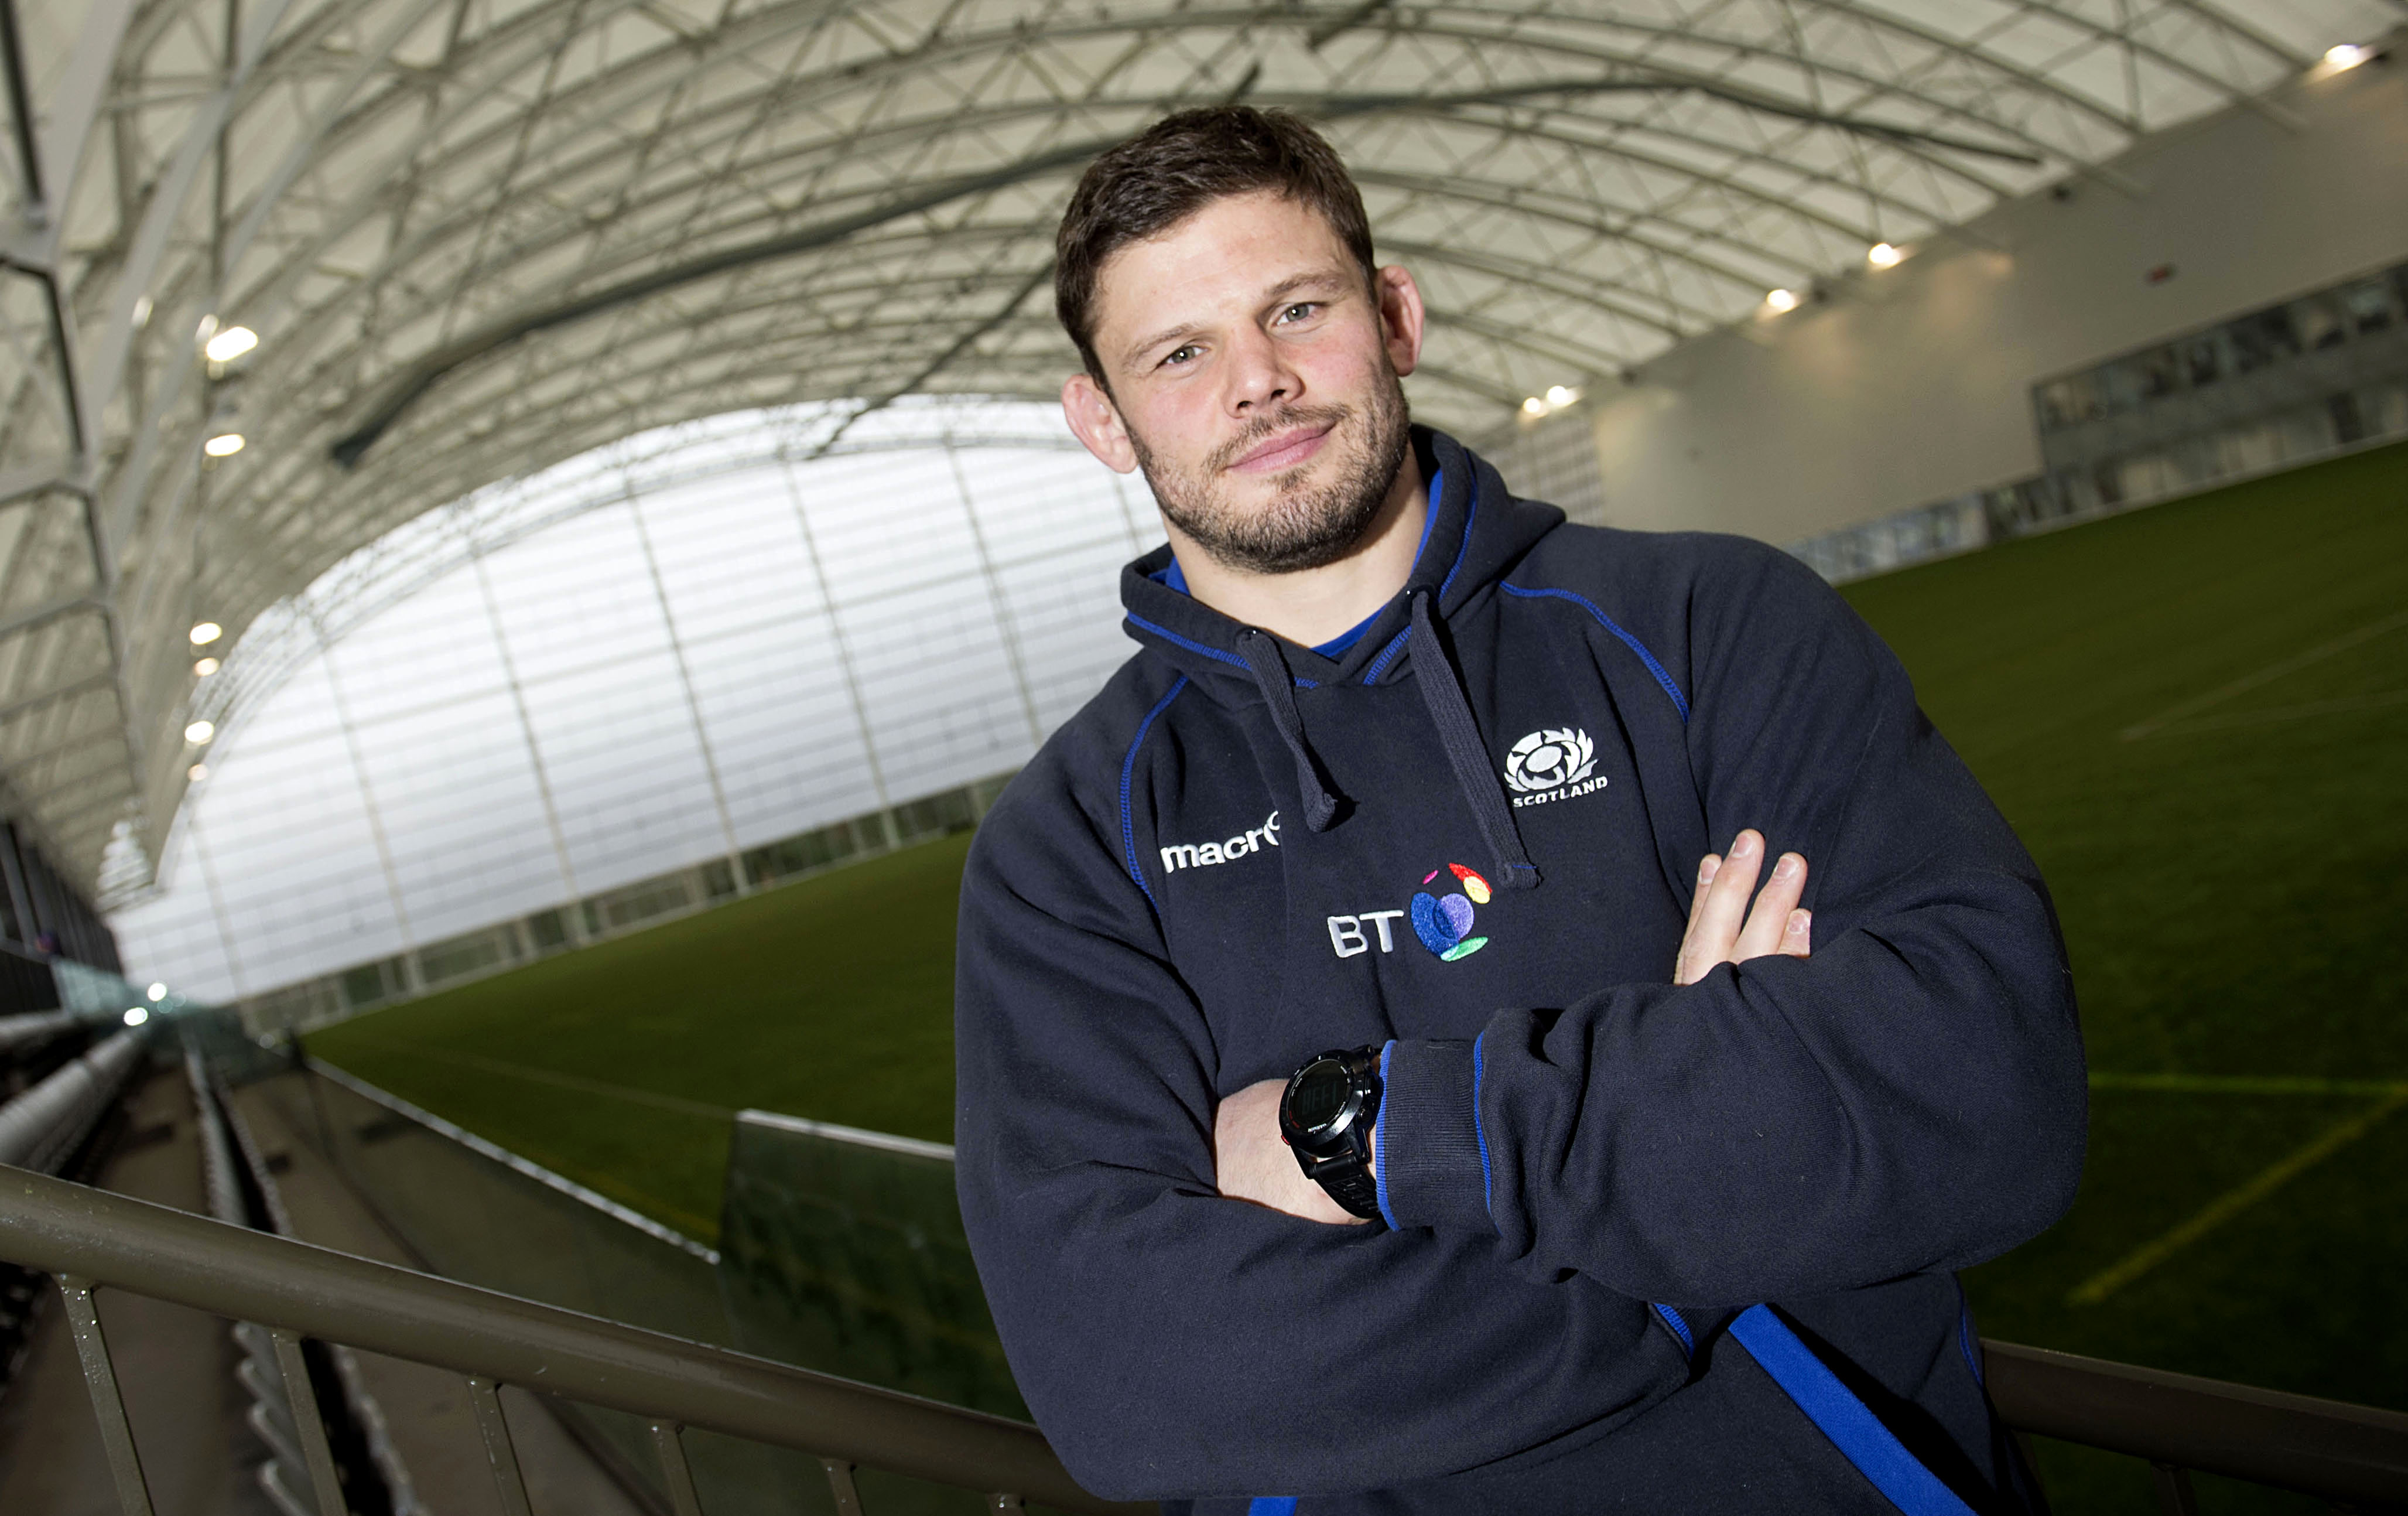 Scotland's most-capped player Ross Ford has retired from rugby.